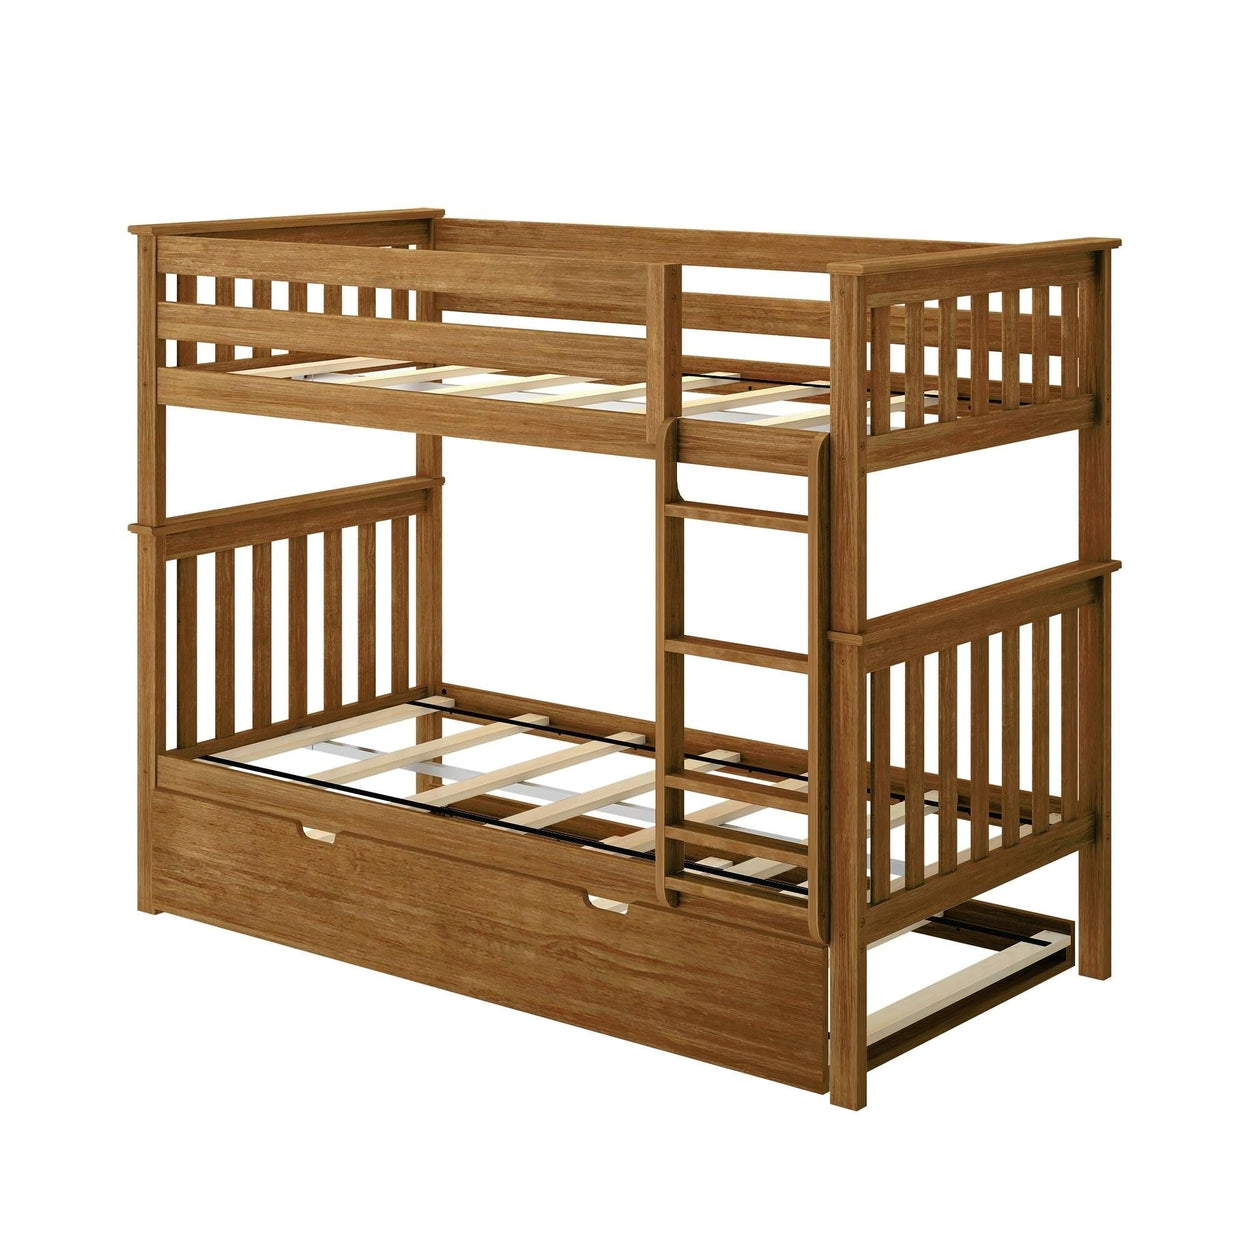 186201-007 : Bunk Beds Classic Twin over Twin Bunk Bed with Trundle, Pecan